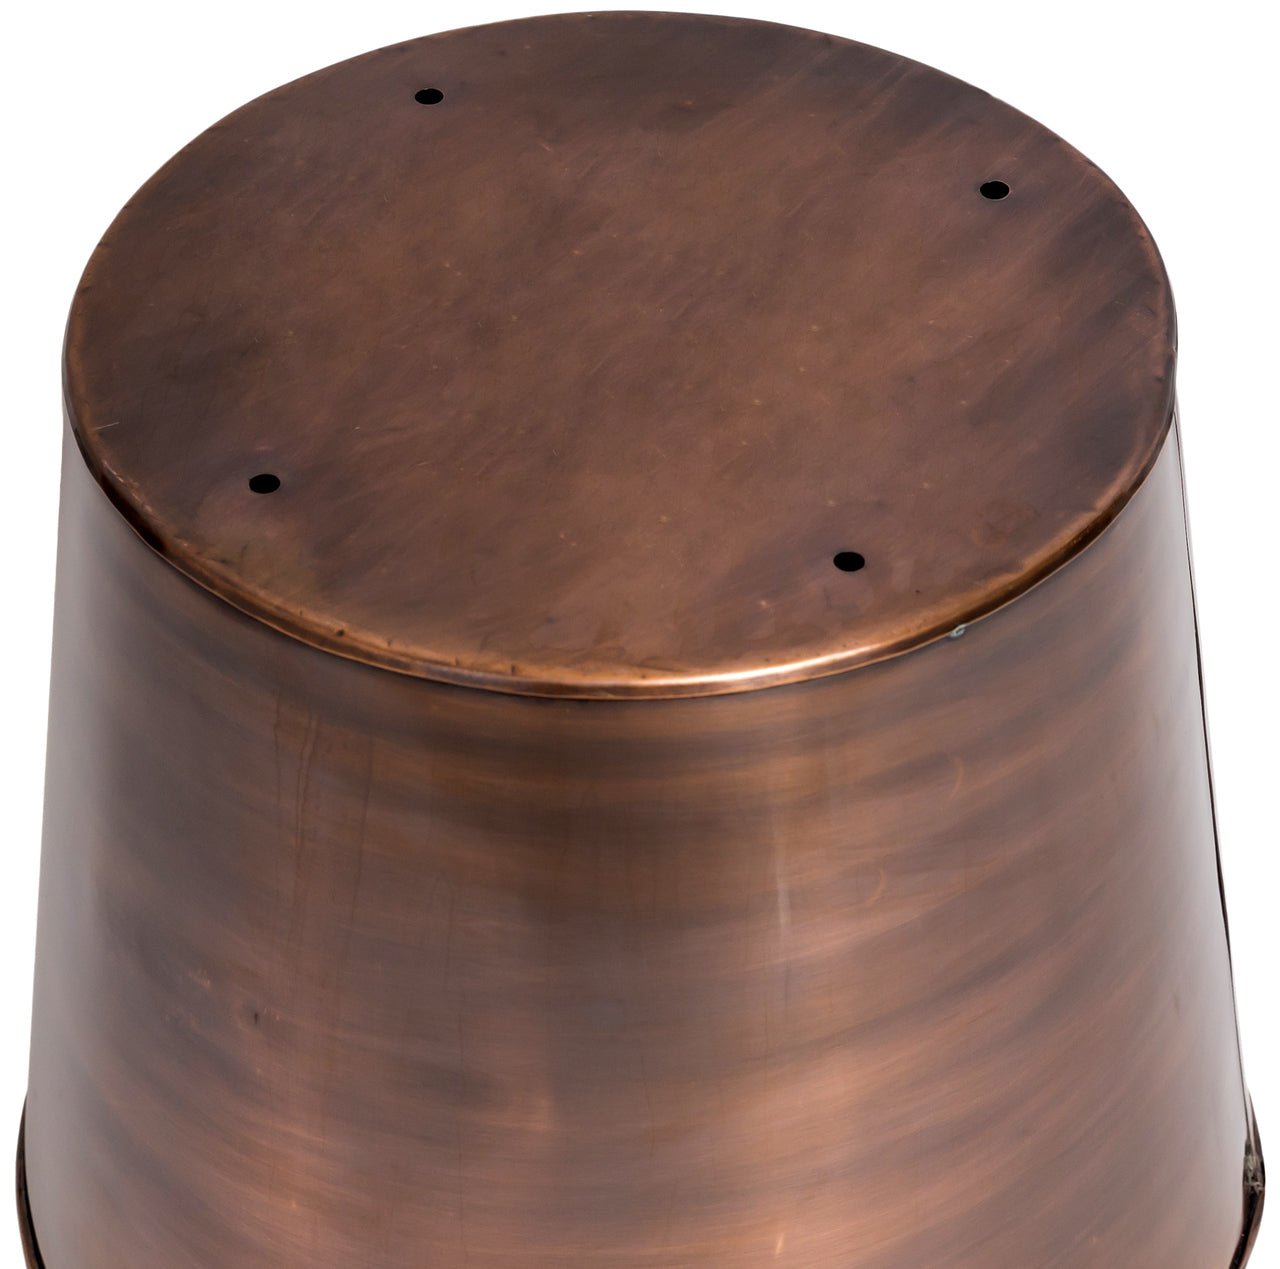 H Potter tall planter metal outdoor indoor flower container round antique copper stainless steel handcrafted